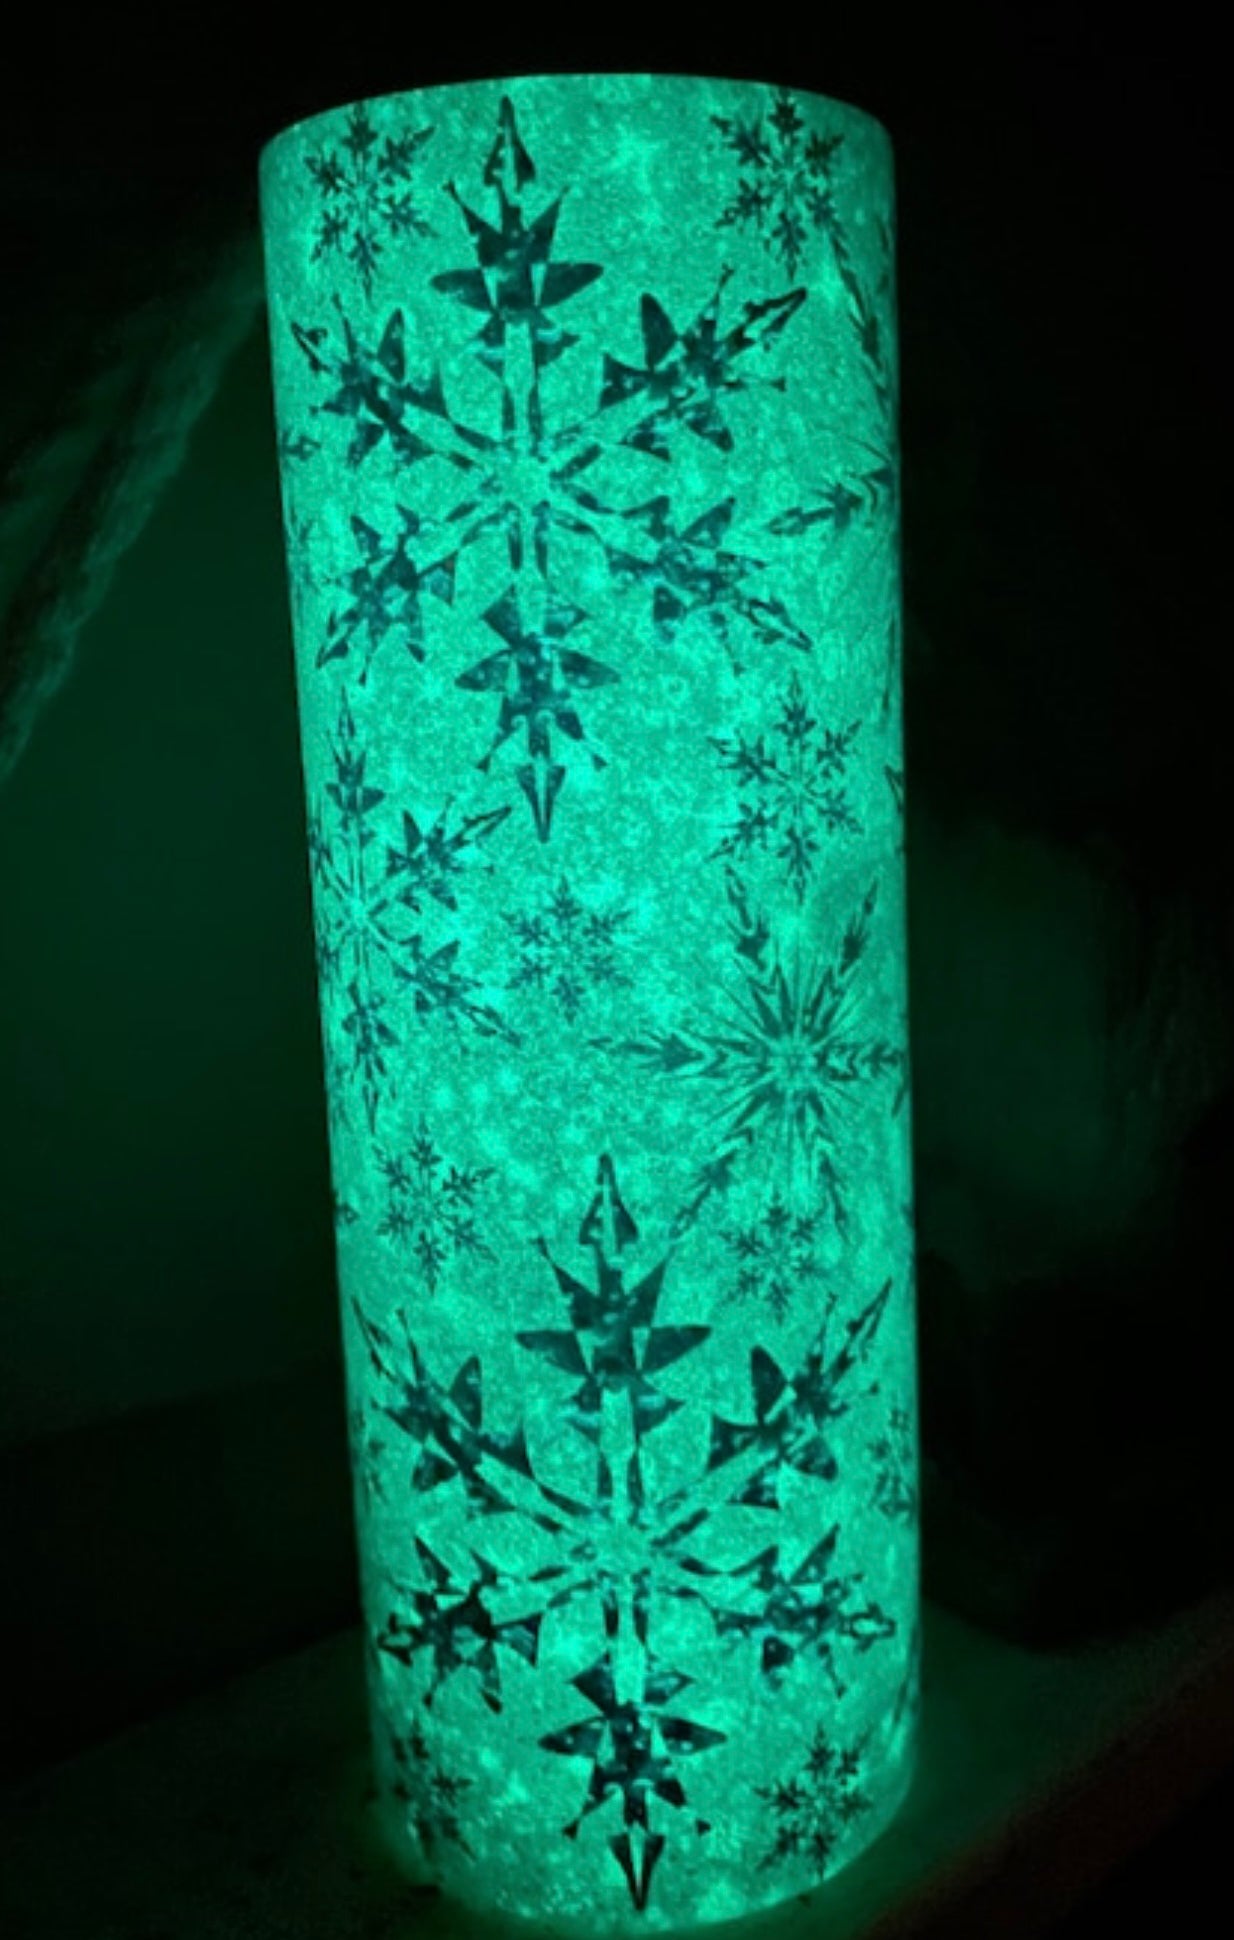 Snowflake Tumbler 20 oz GLOW in the Dark Holiday Christmas Cup